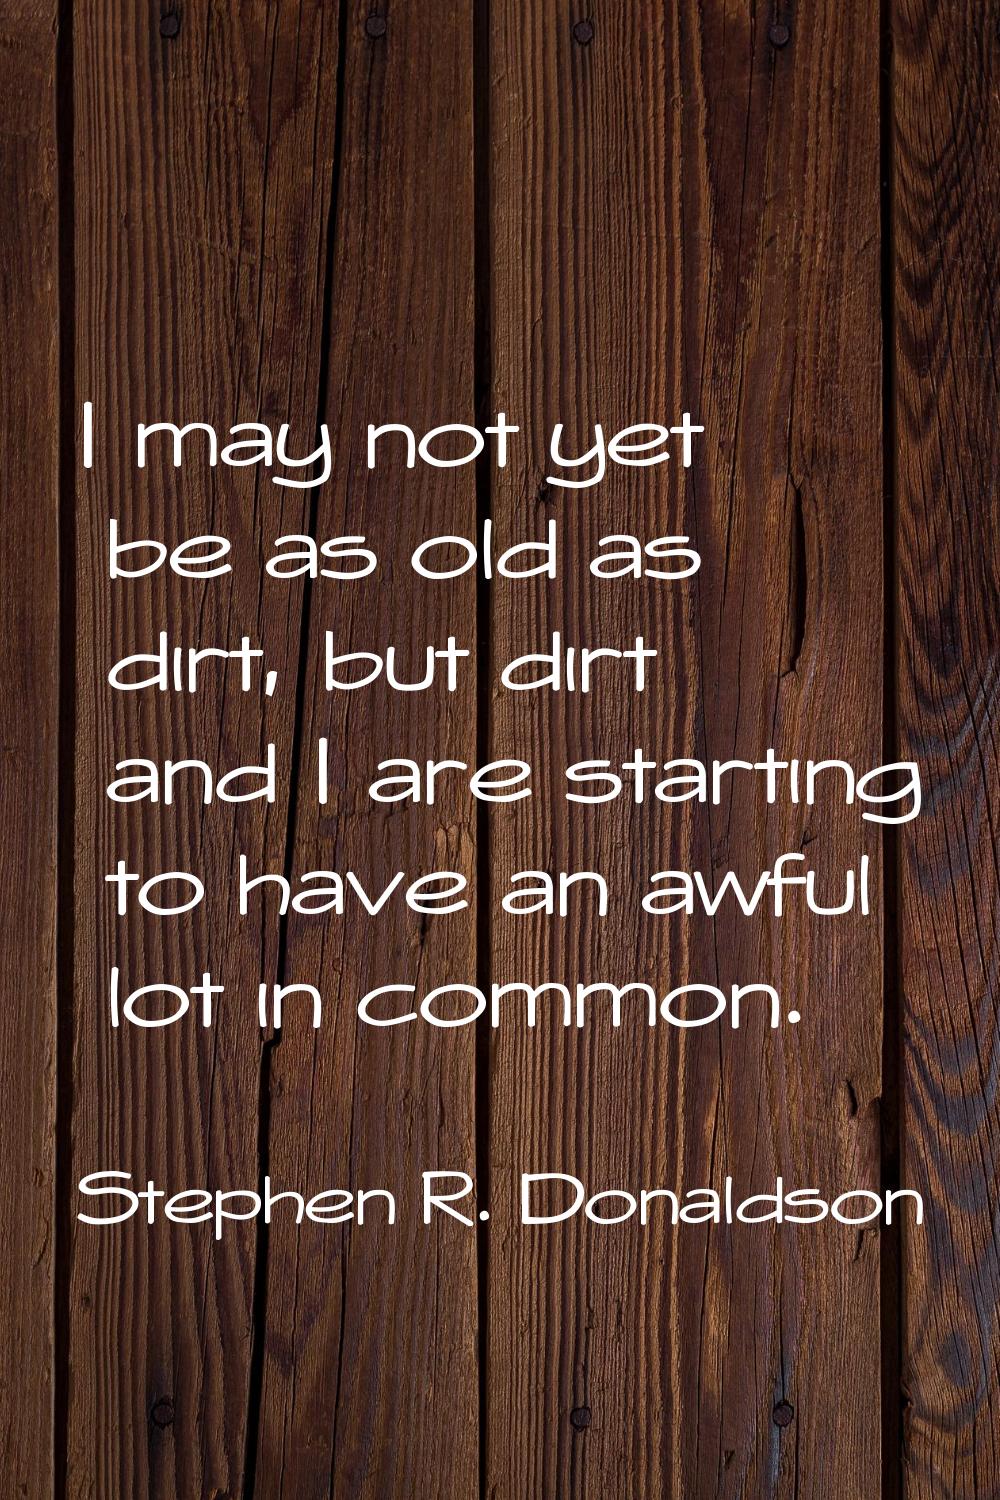 I may not yet be as old as dirt, but dirt and I are starting to have an awful lot in common.